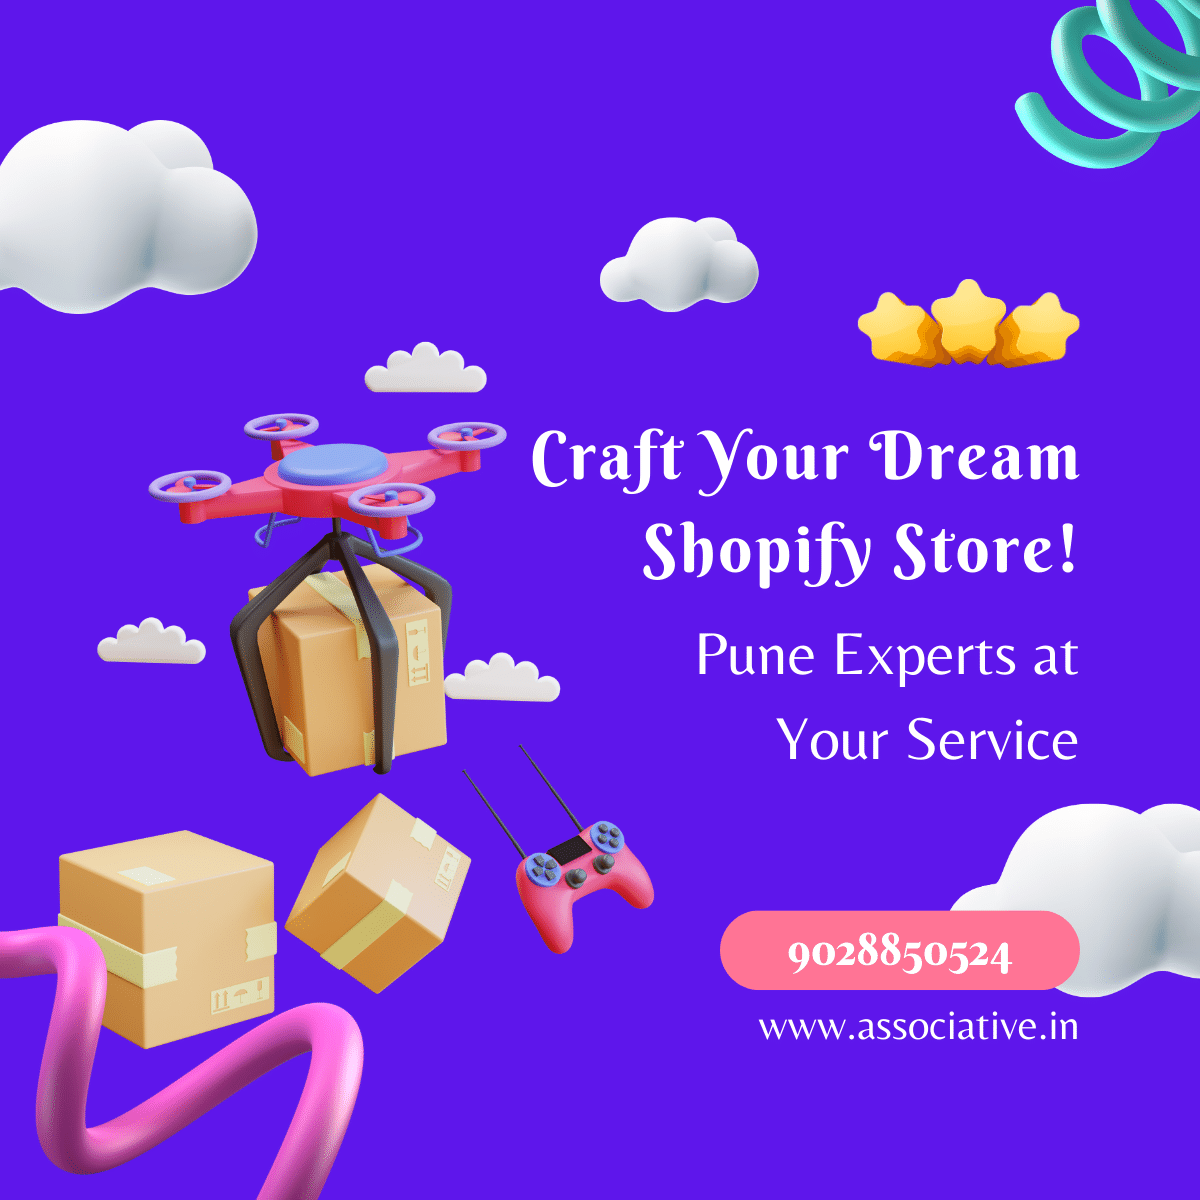 Craft Your Dream Shopify Store! Pune Experts at Your Service